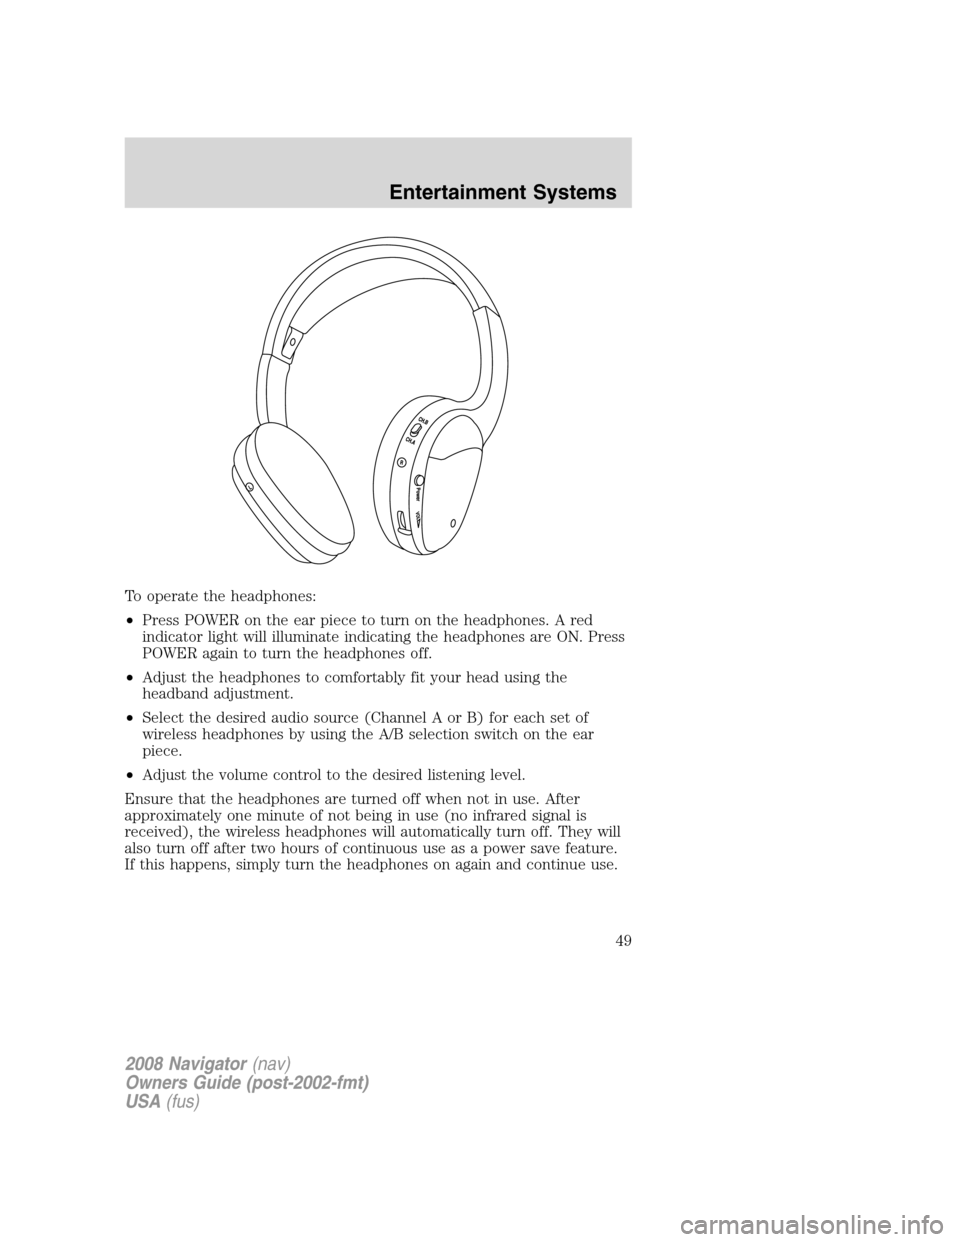 LINCOLN NAVIGATOR 2008 Service Manual To operate the headphones:
•Press POWER on the ear piece to turn on the headphones. A red
indicator light will illuminate indicating the headphones are ON. Press
POWER again to turn the headphones o